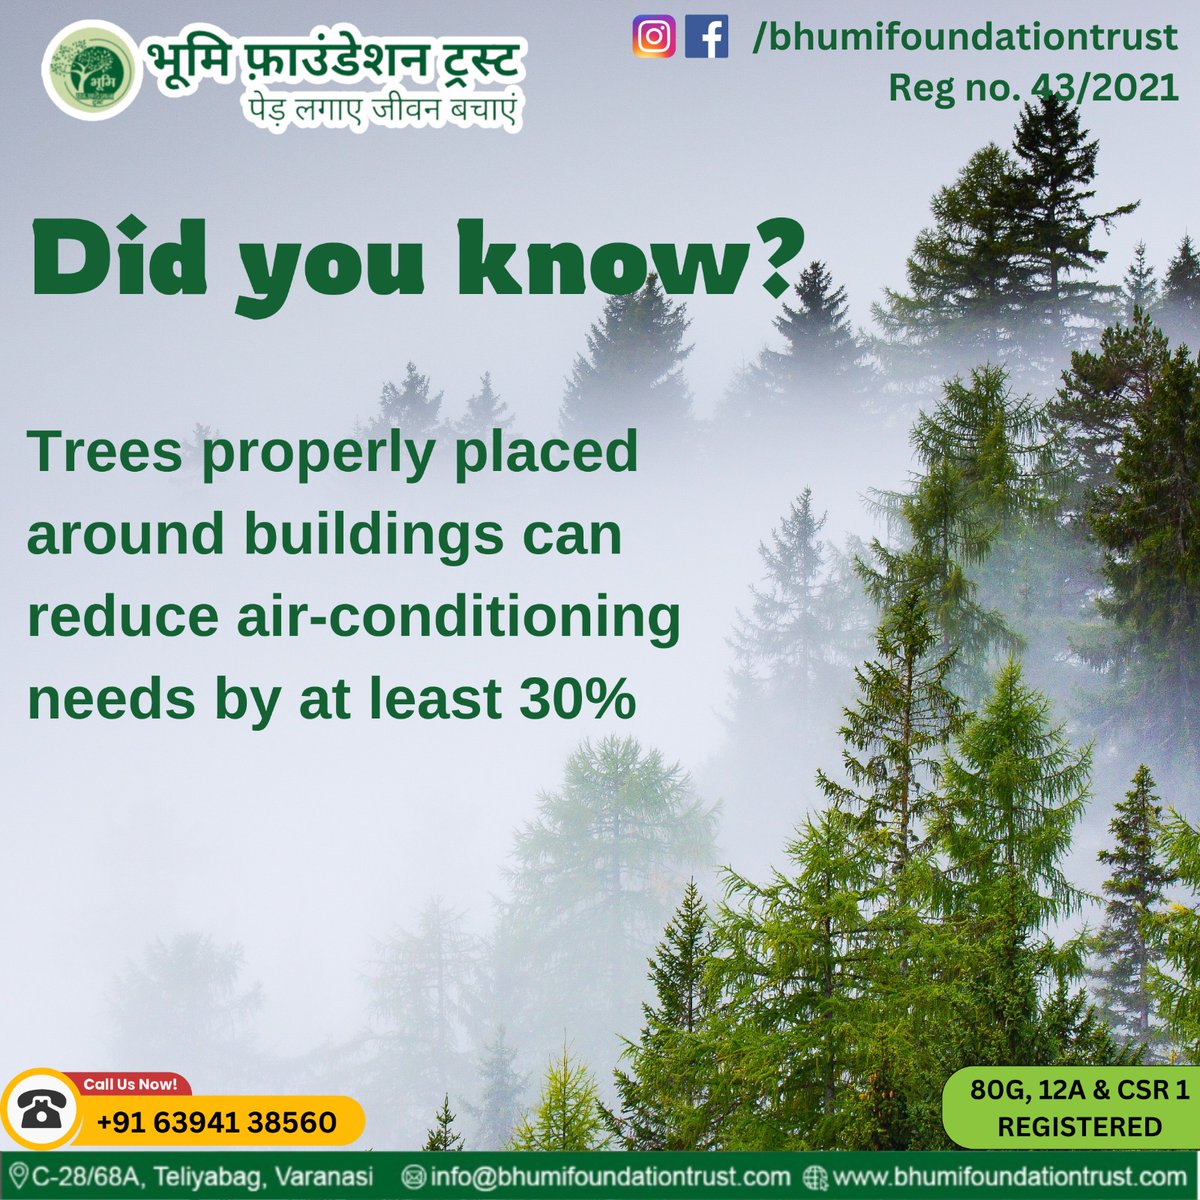 Cool your home and the planet! 🌳 Properly placed trees can cut your air-conditioning needs by over 30%.

जुड़िए भूमि फाऊंडेशन ट्रस्ट से :
bhumifoundationtrust.com

#saveenvironment #bhumifoundation #airpollution #savetree #savefuture #save #pollutionfreeindia